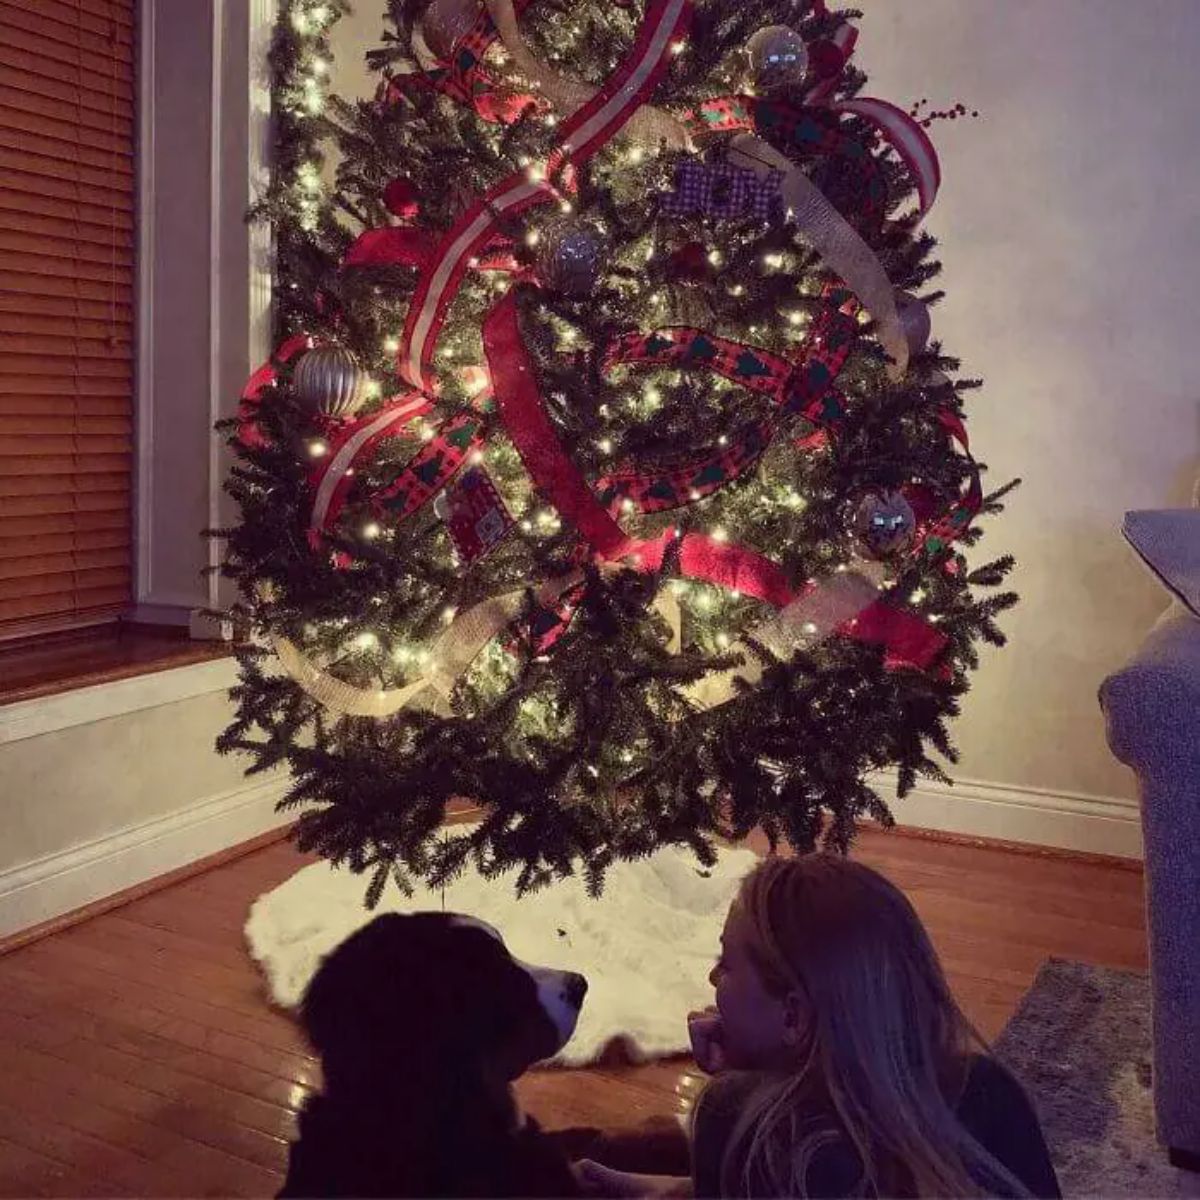 black and white dog and woman laying on a woonde floor udner a decorated and lit up christmas tree